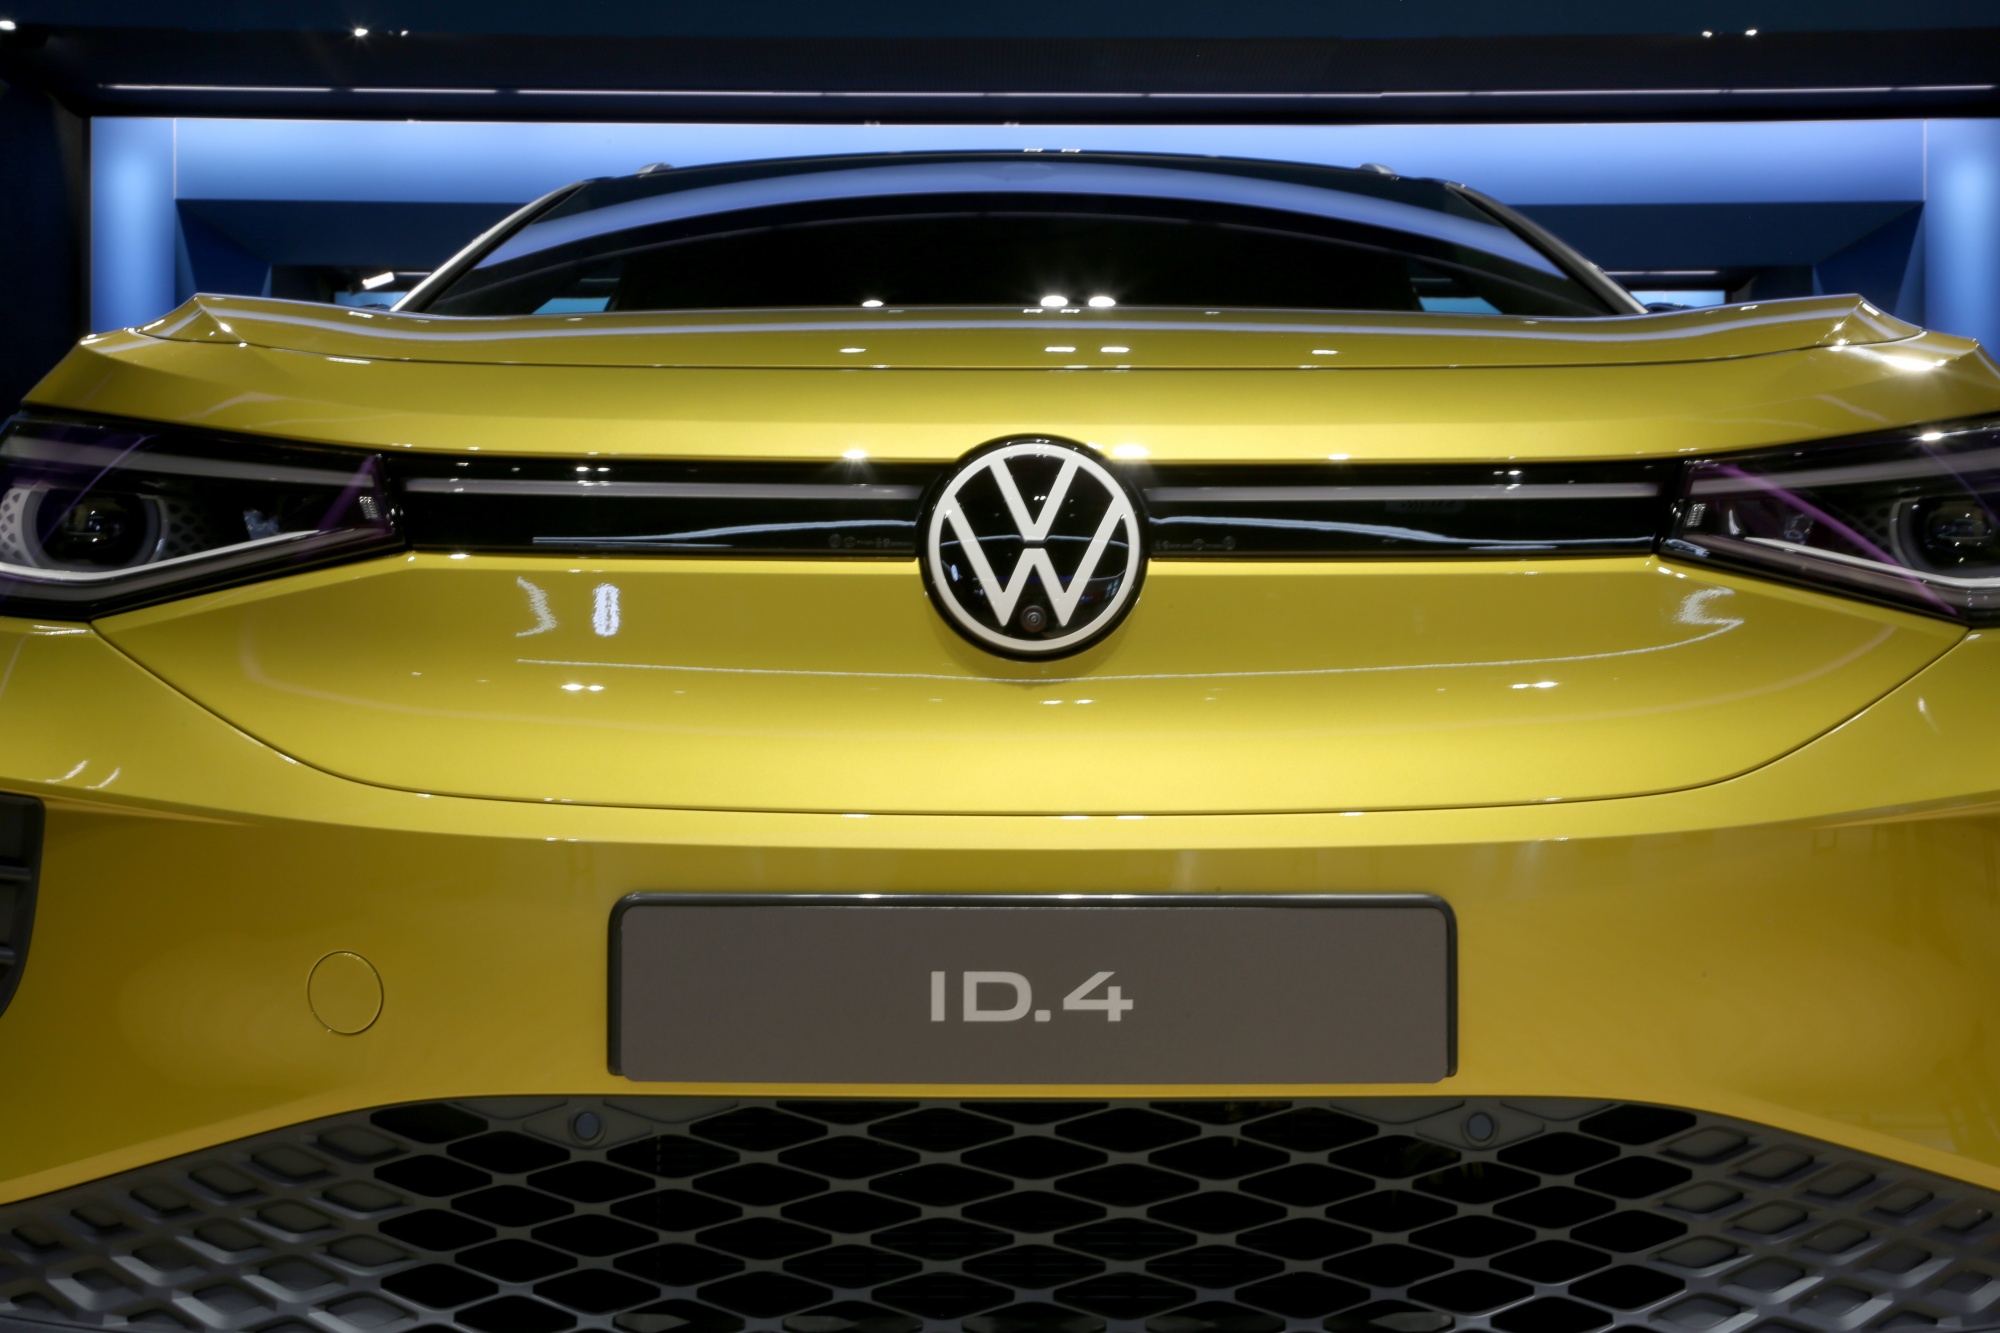 New VW Gol Aims To Keep And Expand Its Leadership